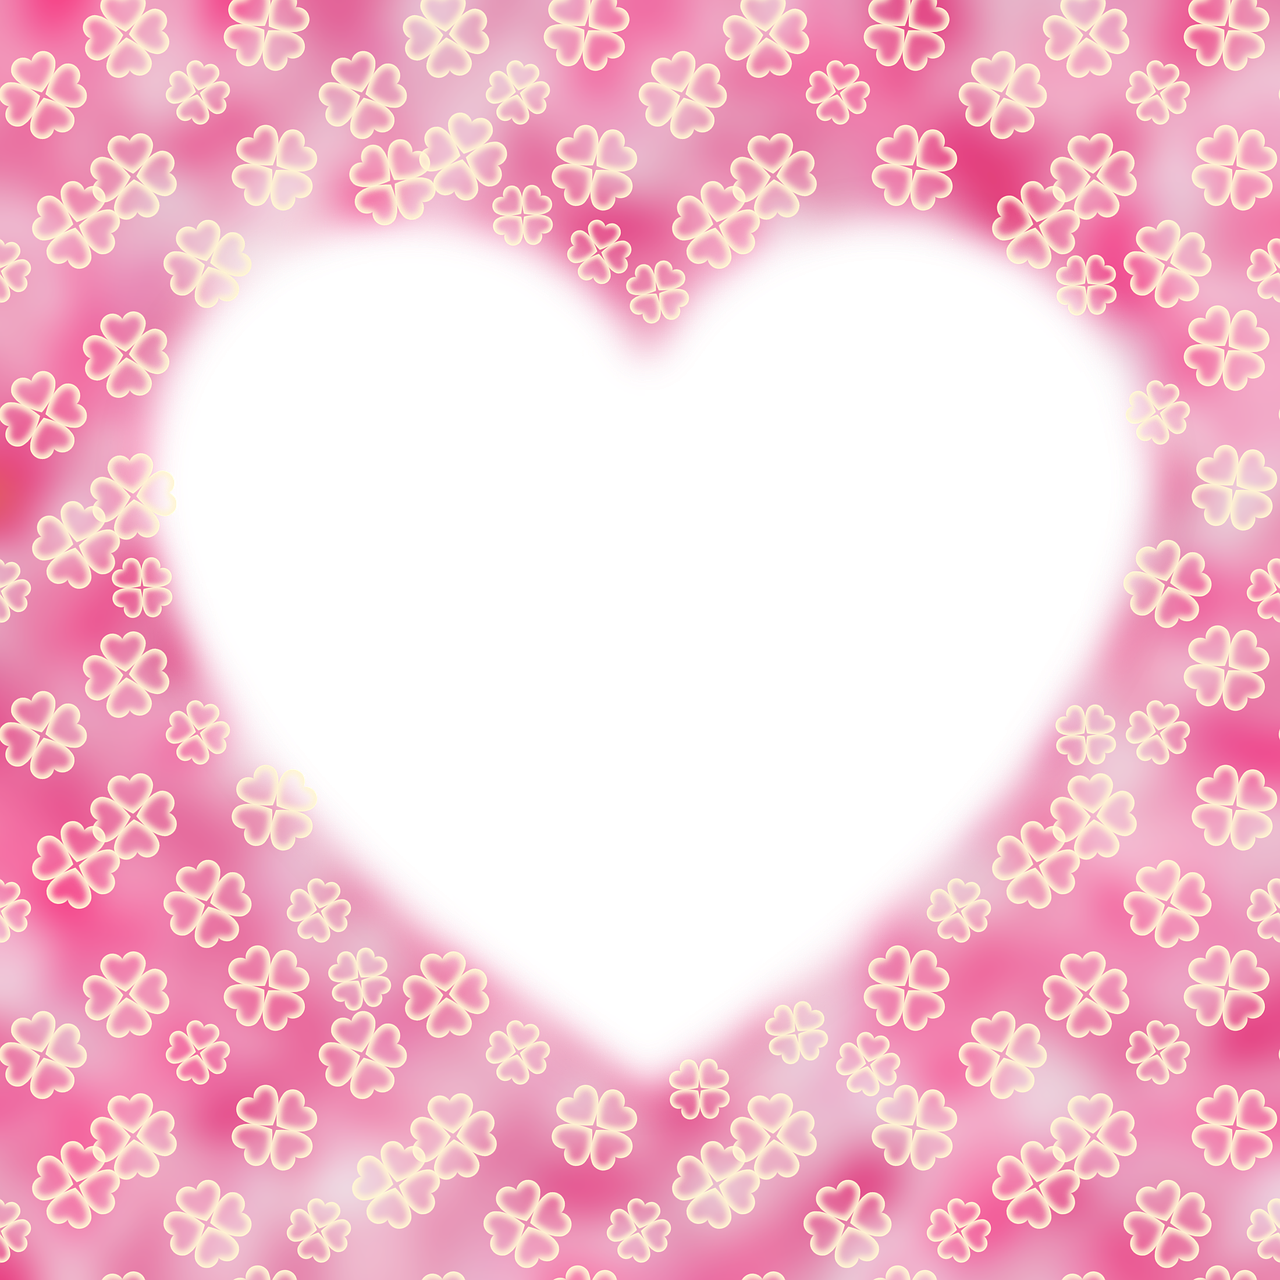 a picture of a black heart on a pink background, a picture, flickr, sōsaku hanga, flower frame, some background blur, smooth in _ the background, clipart